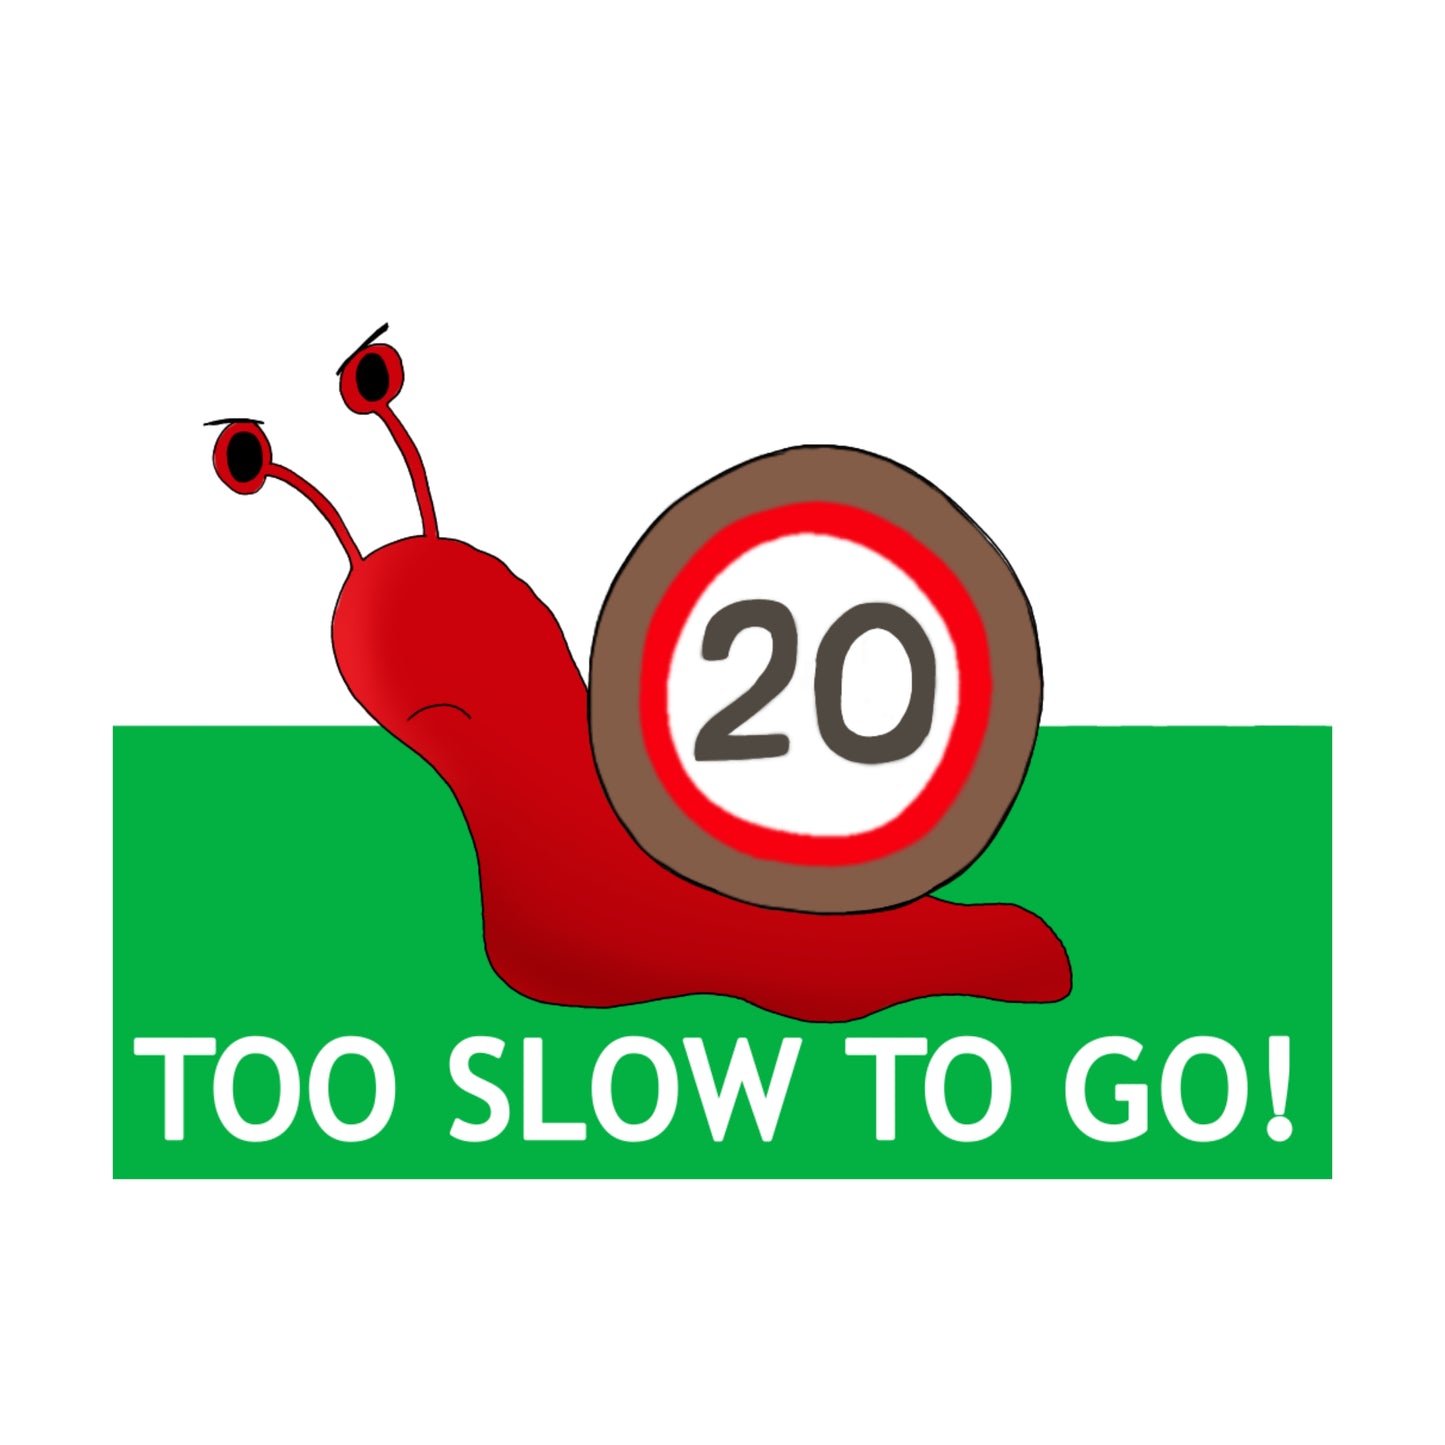 Exclusive TOO SLOW TO GO 20mph! - Car Window Stickers  *FREE UK POSTAGE